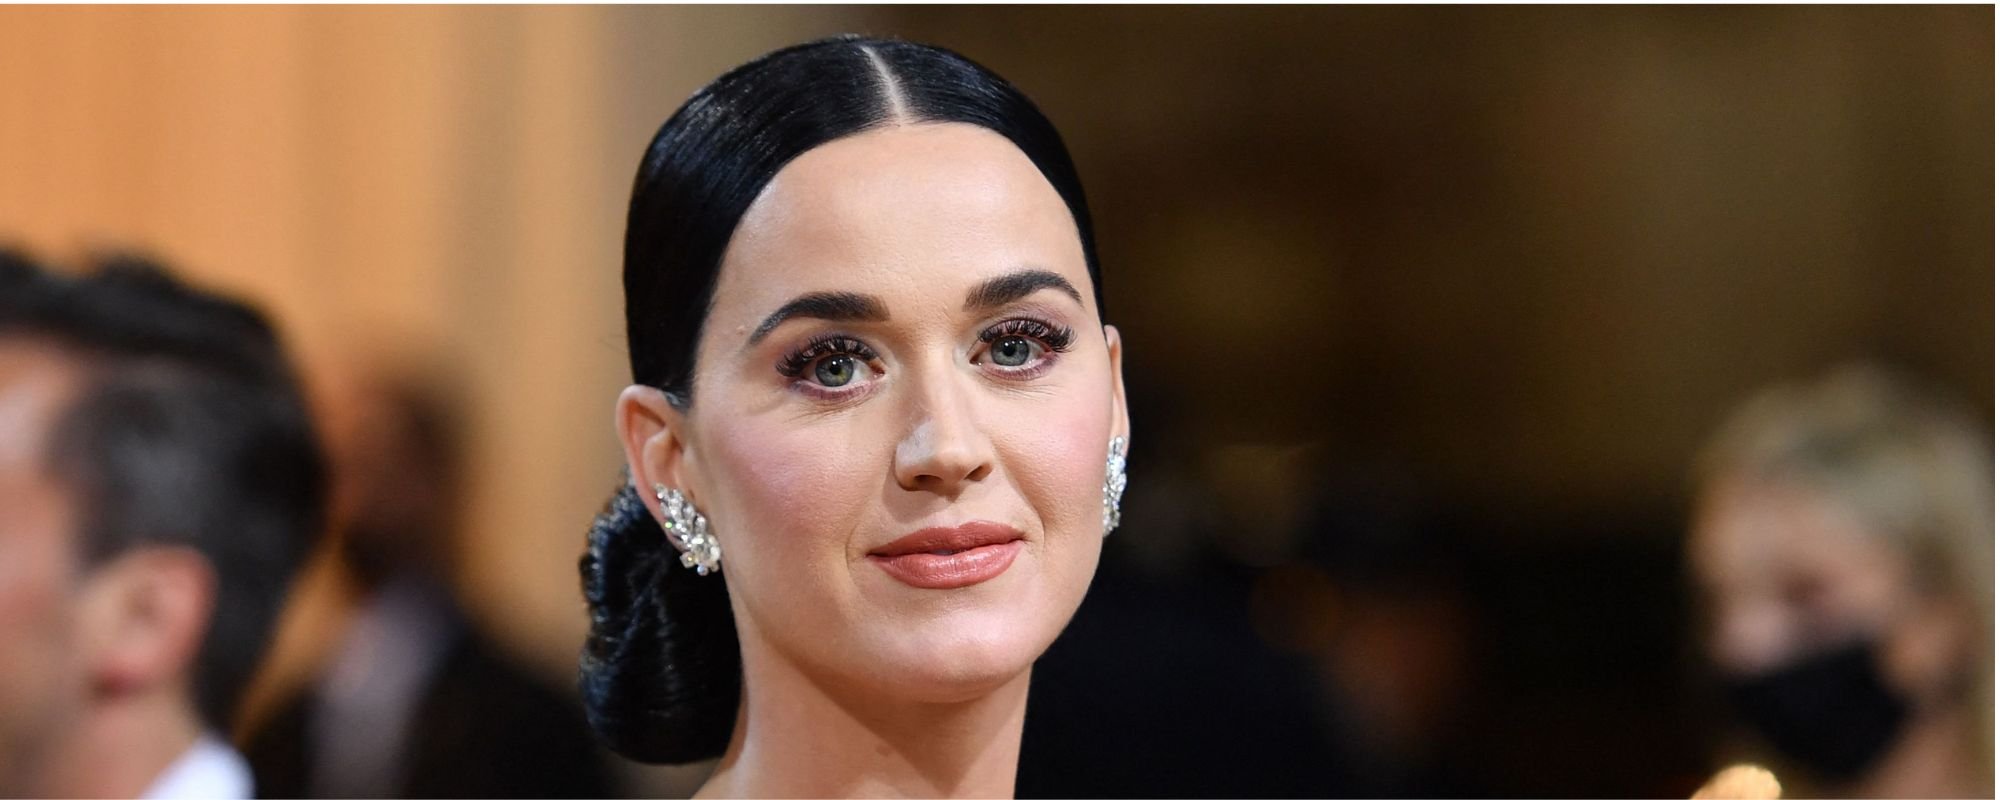 Did You Know Katy Perry's "I Kissed a Girl" Was Inspired by a Famous Actress?